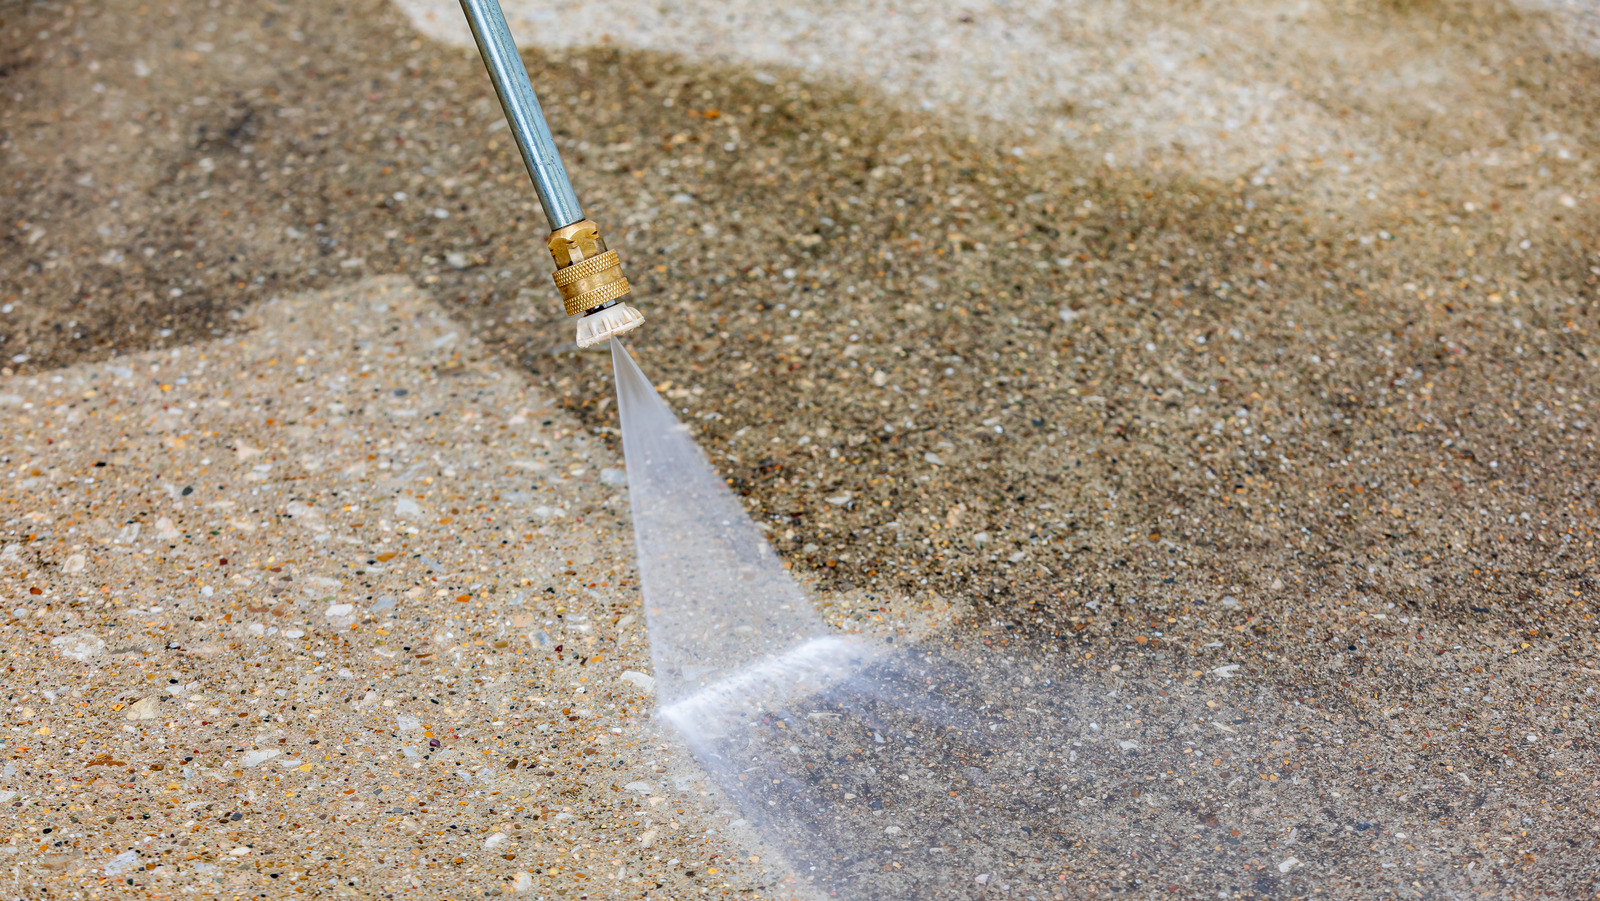 12 Precautions To Take When Pressure Washing Your House This Spring – House Digest